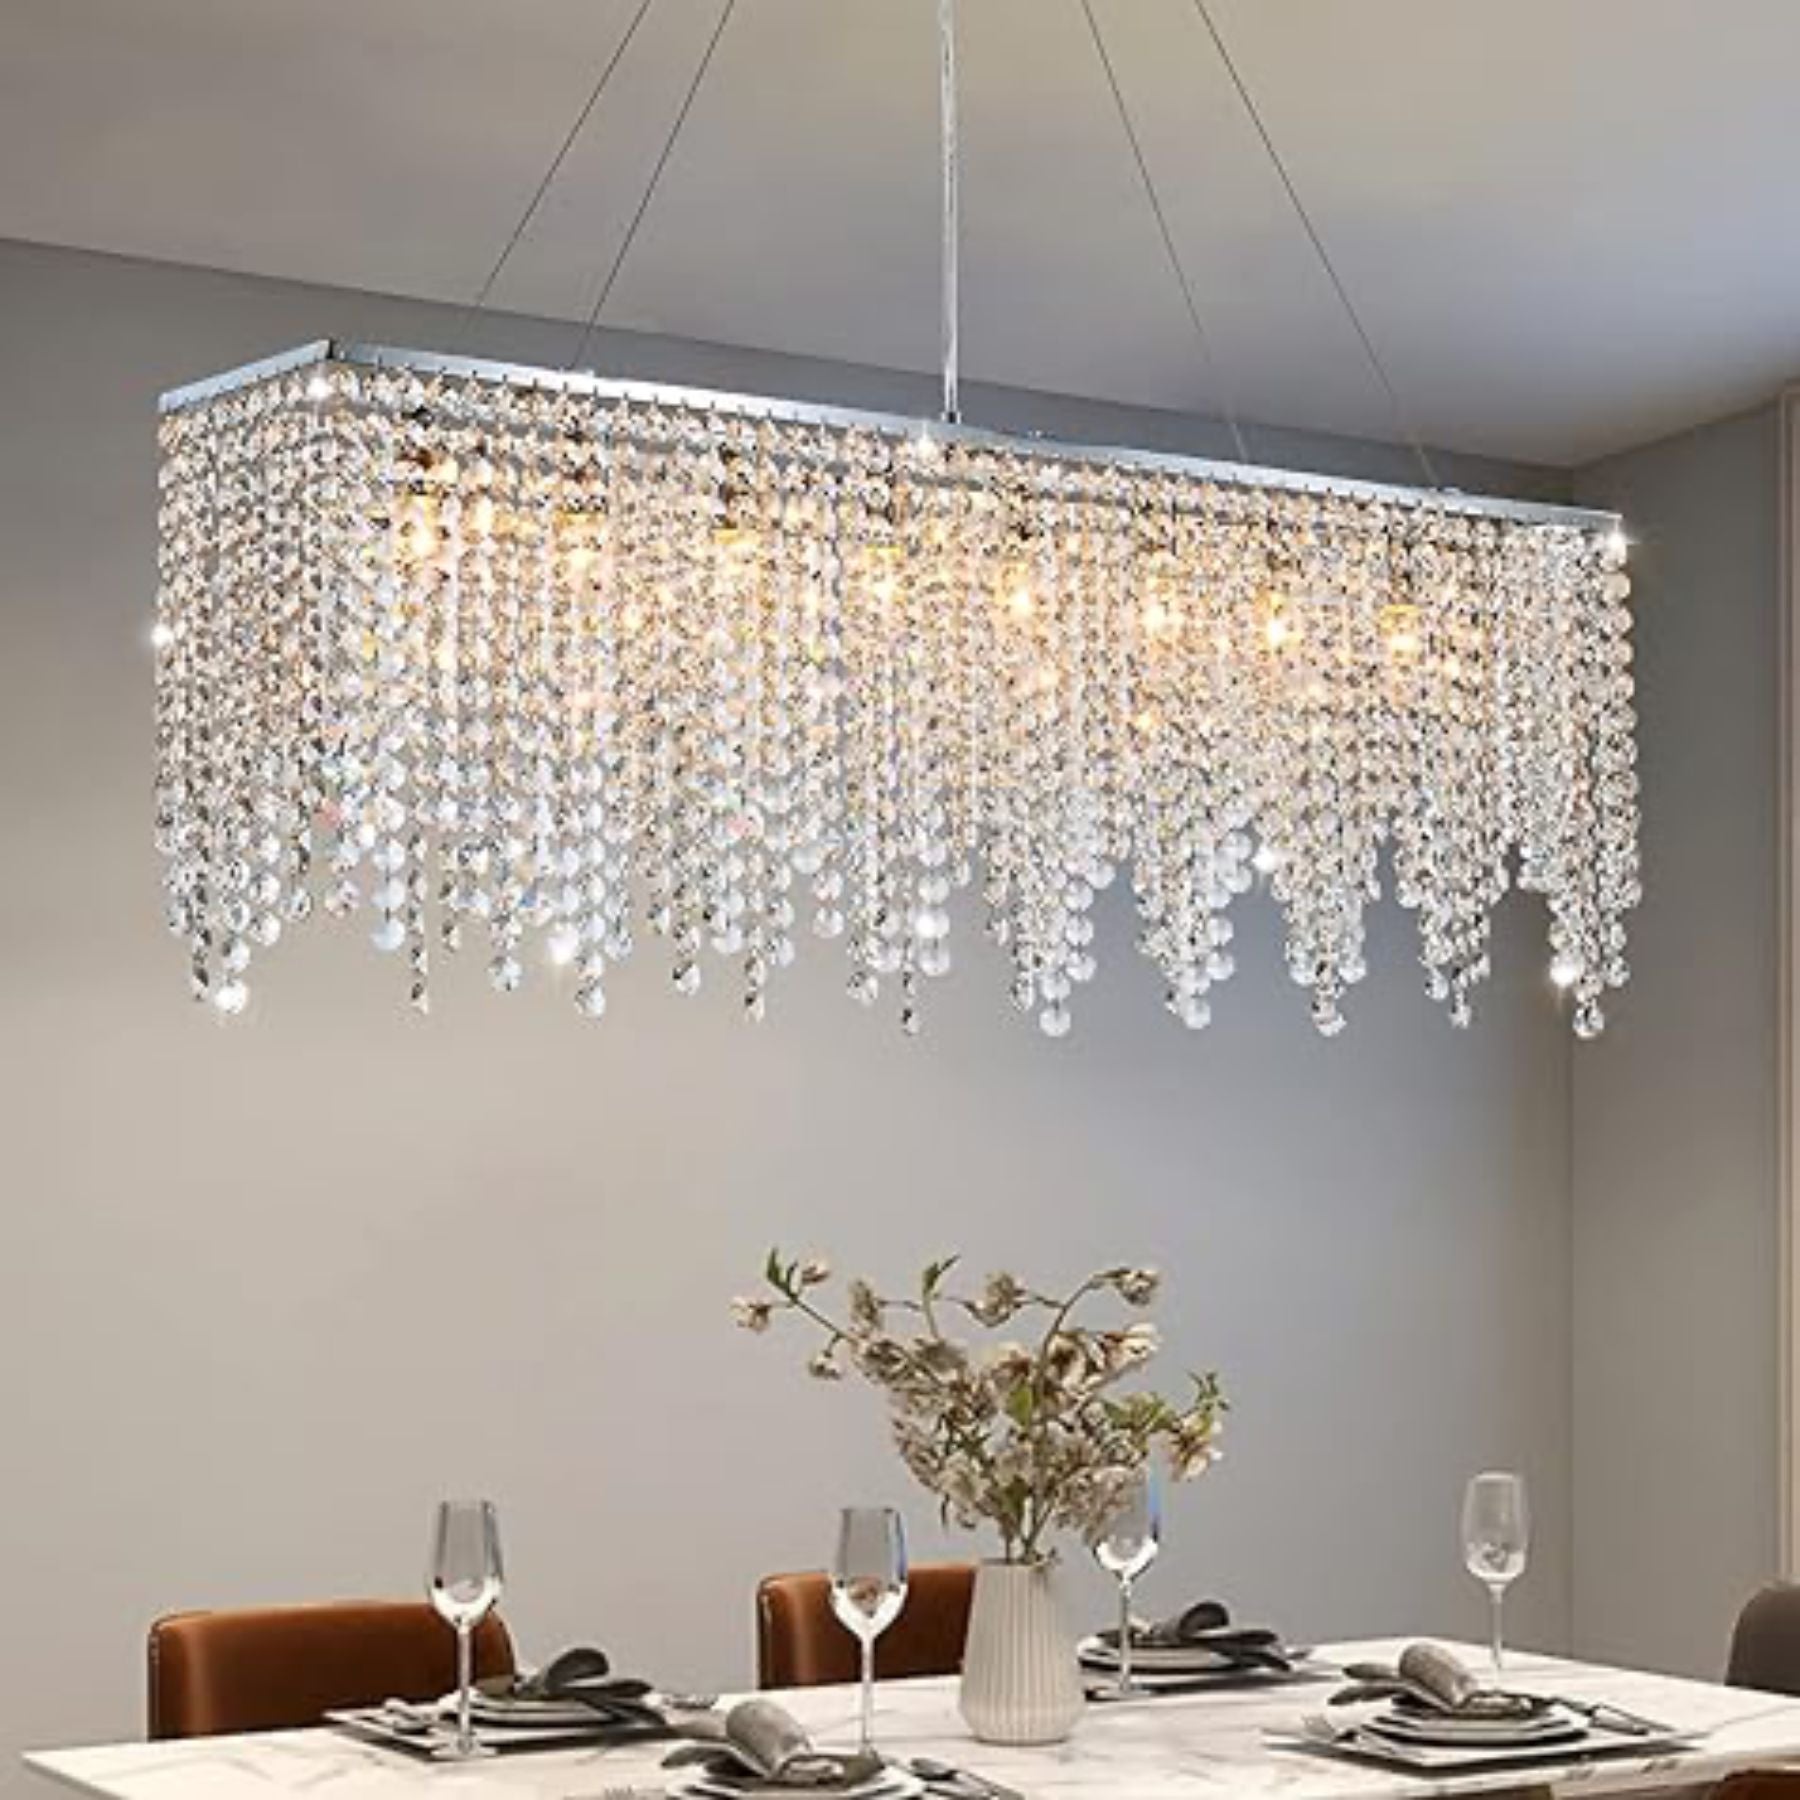 the rectangular crystal chandelier is a striking combination designed to enhance the aesthetics of a dining room or kitchen